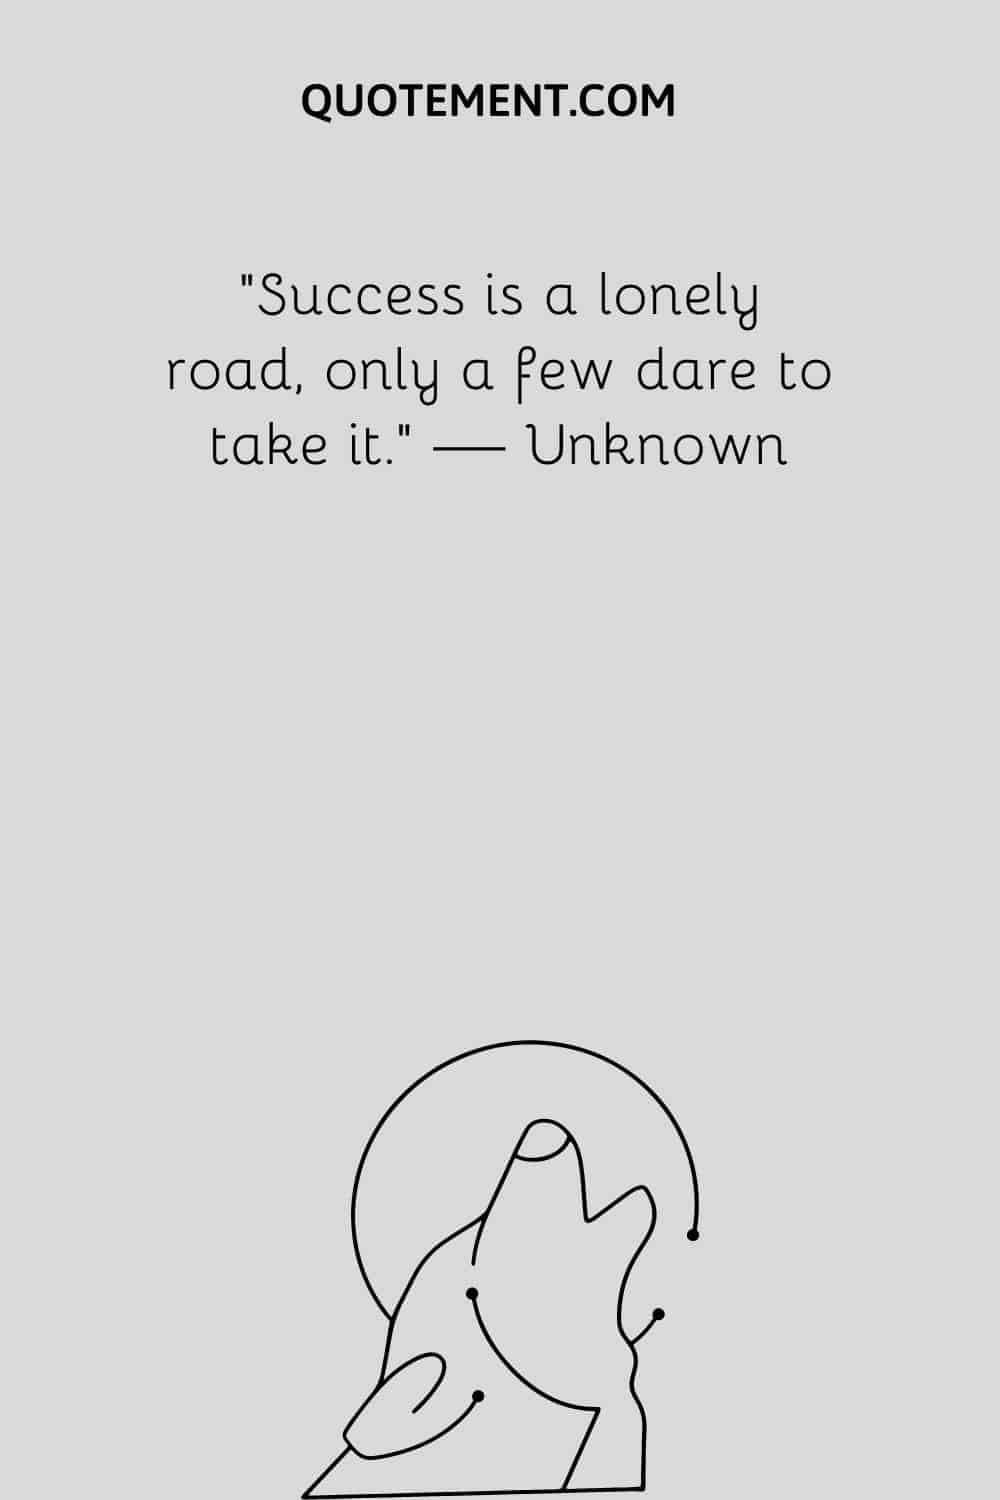 Success is a lonely road, only a few dare to take it